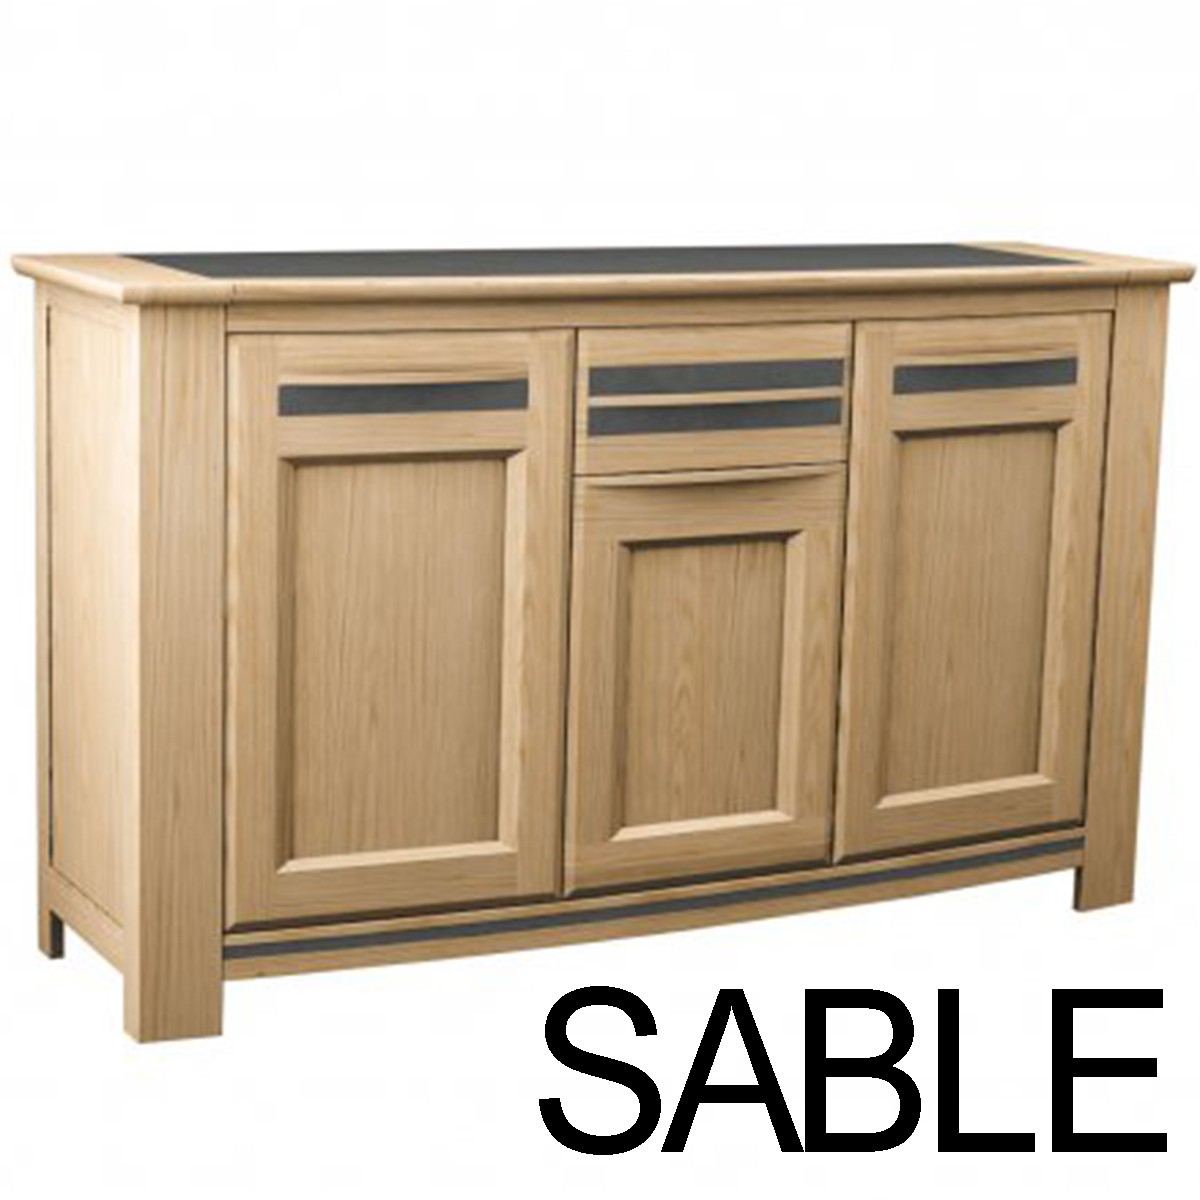 T329 Sable